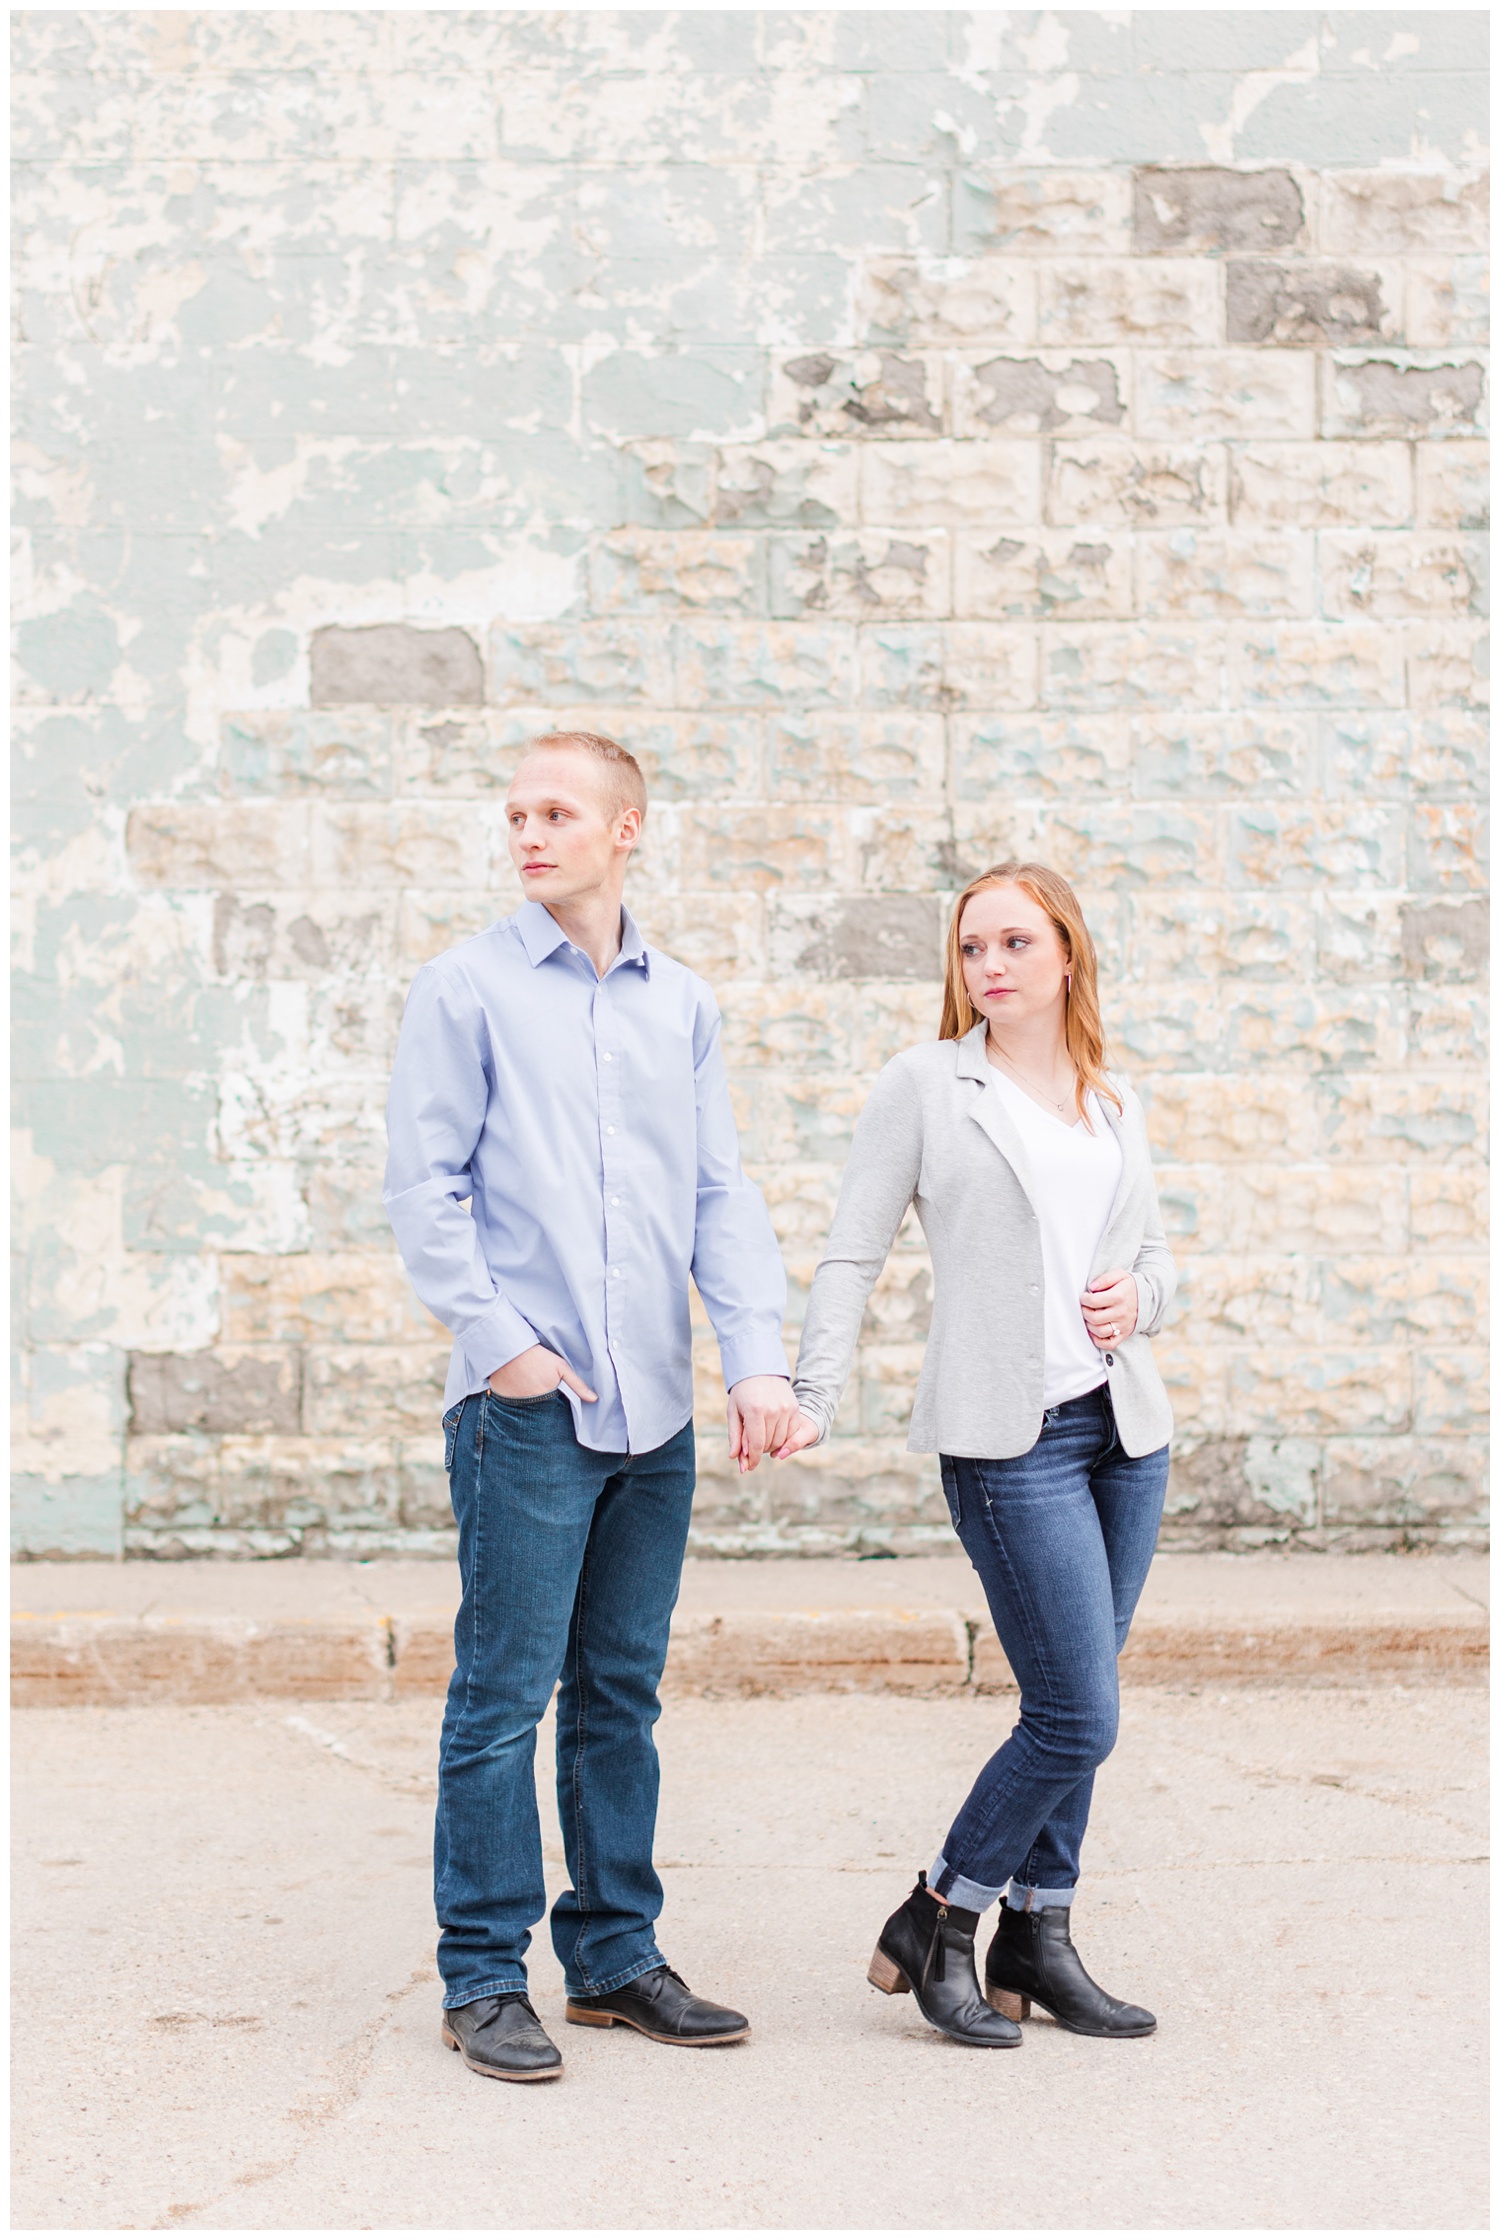 Brenna and Jacob stand holding hands in front of a rustic stone building colored mint and cream | CB Studio